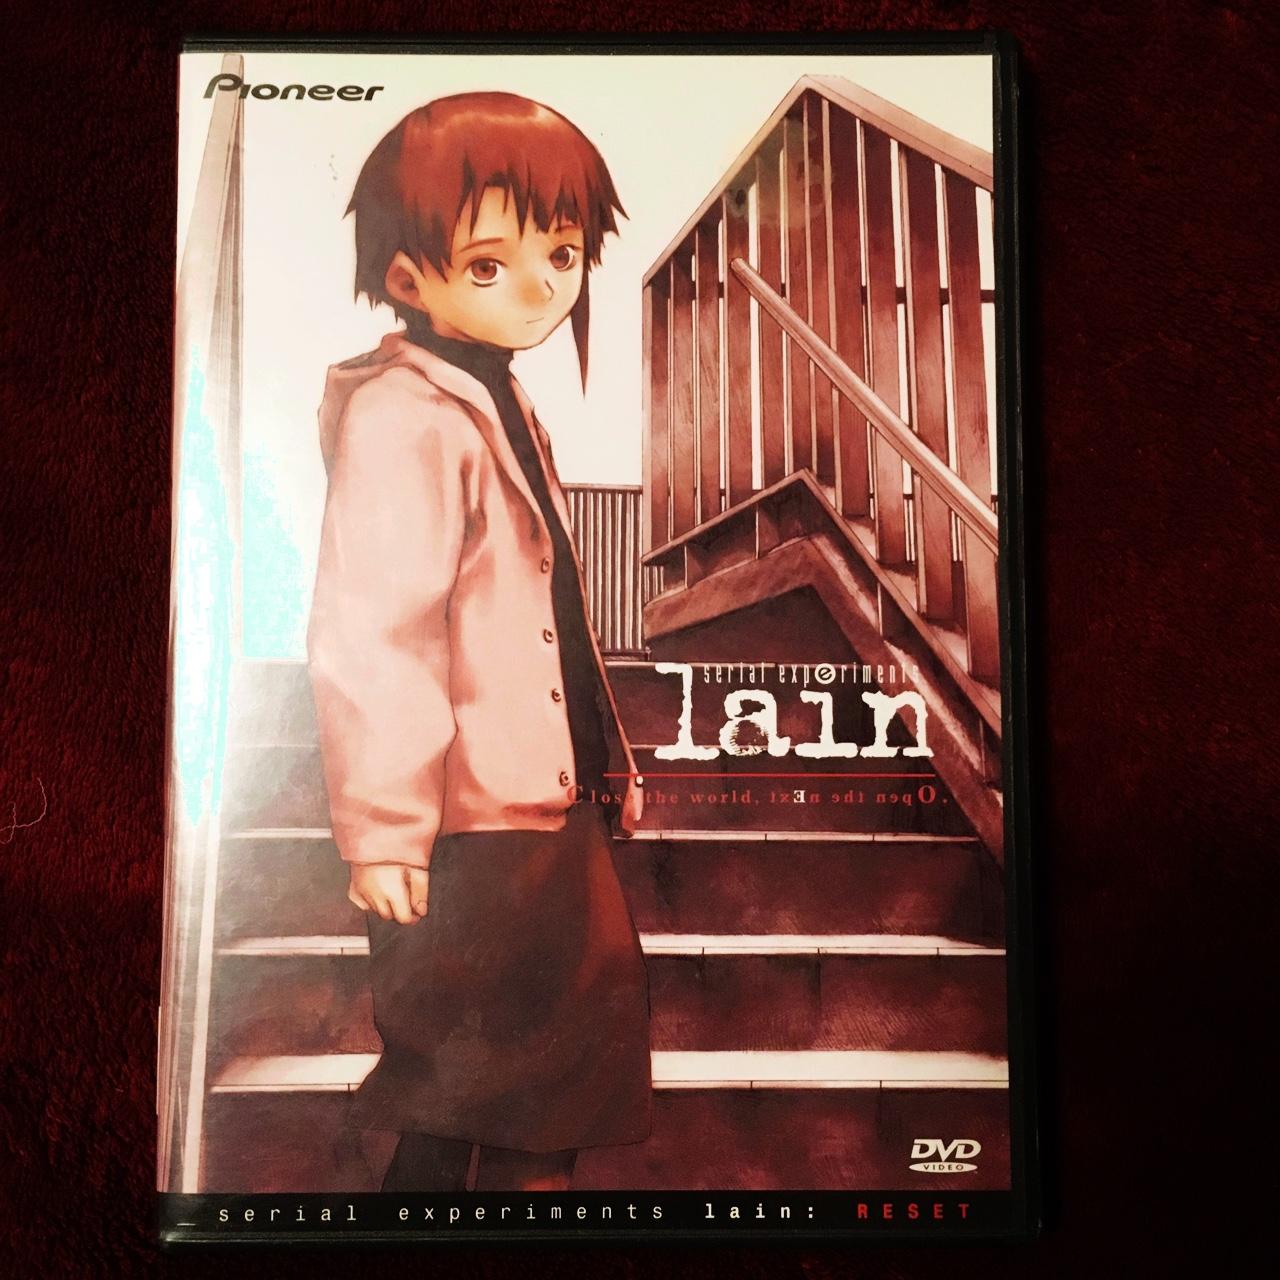 Serial Experiments Lain disc 1: Navi in wrong case.